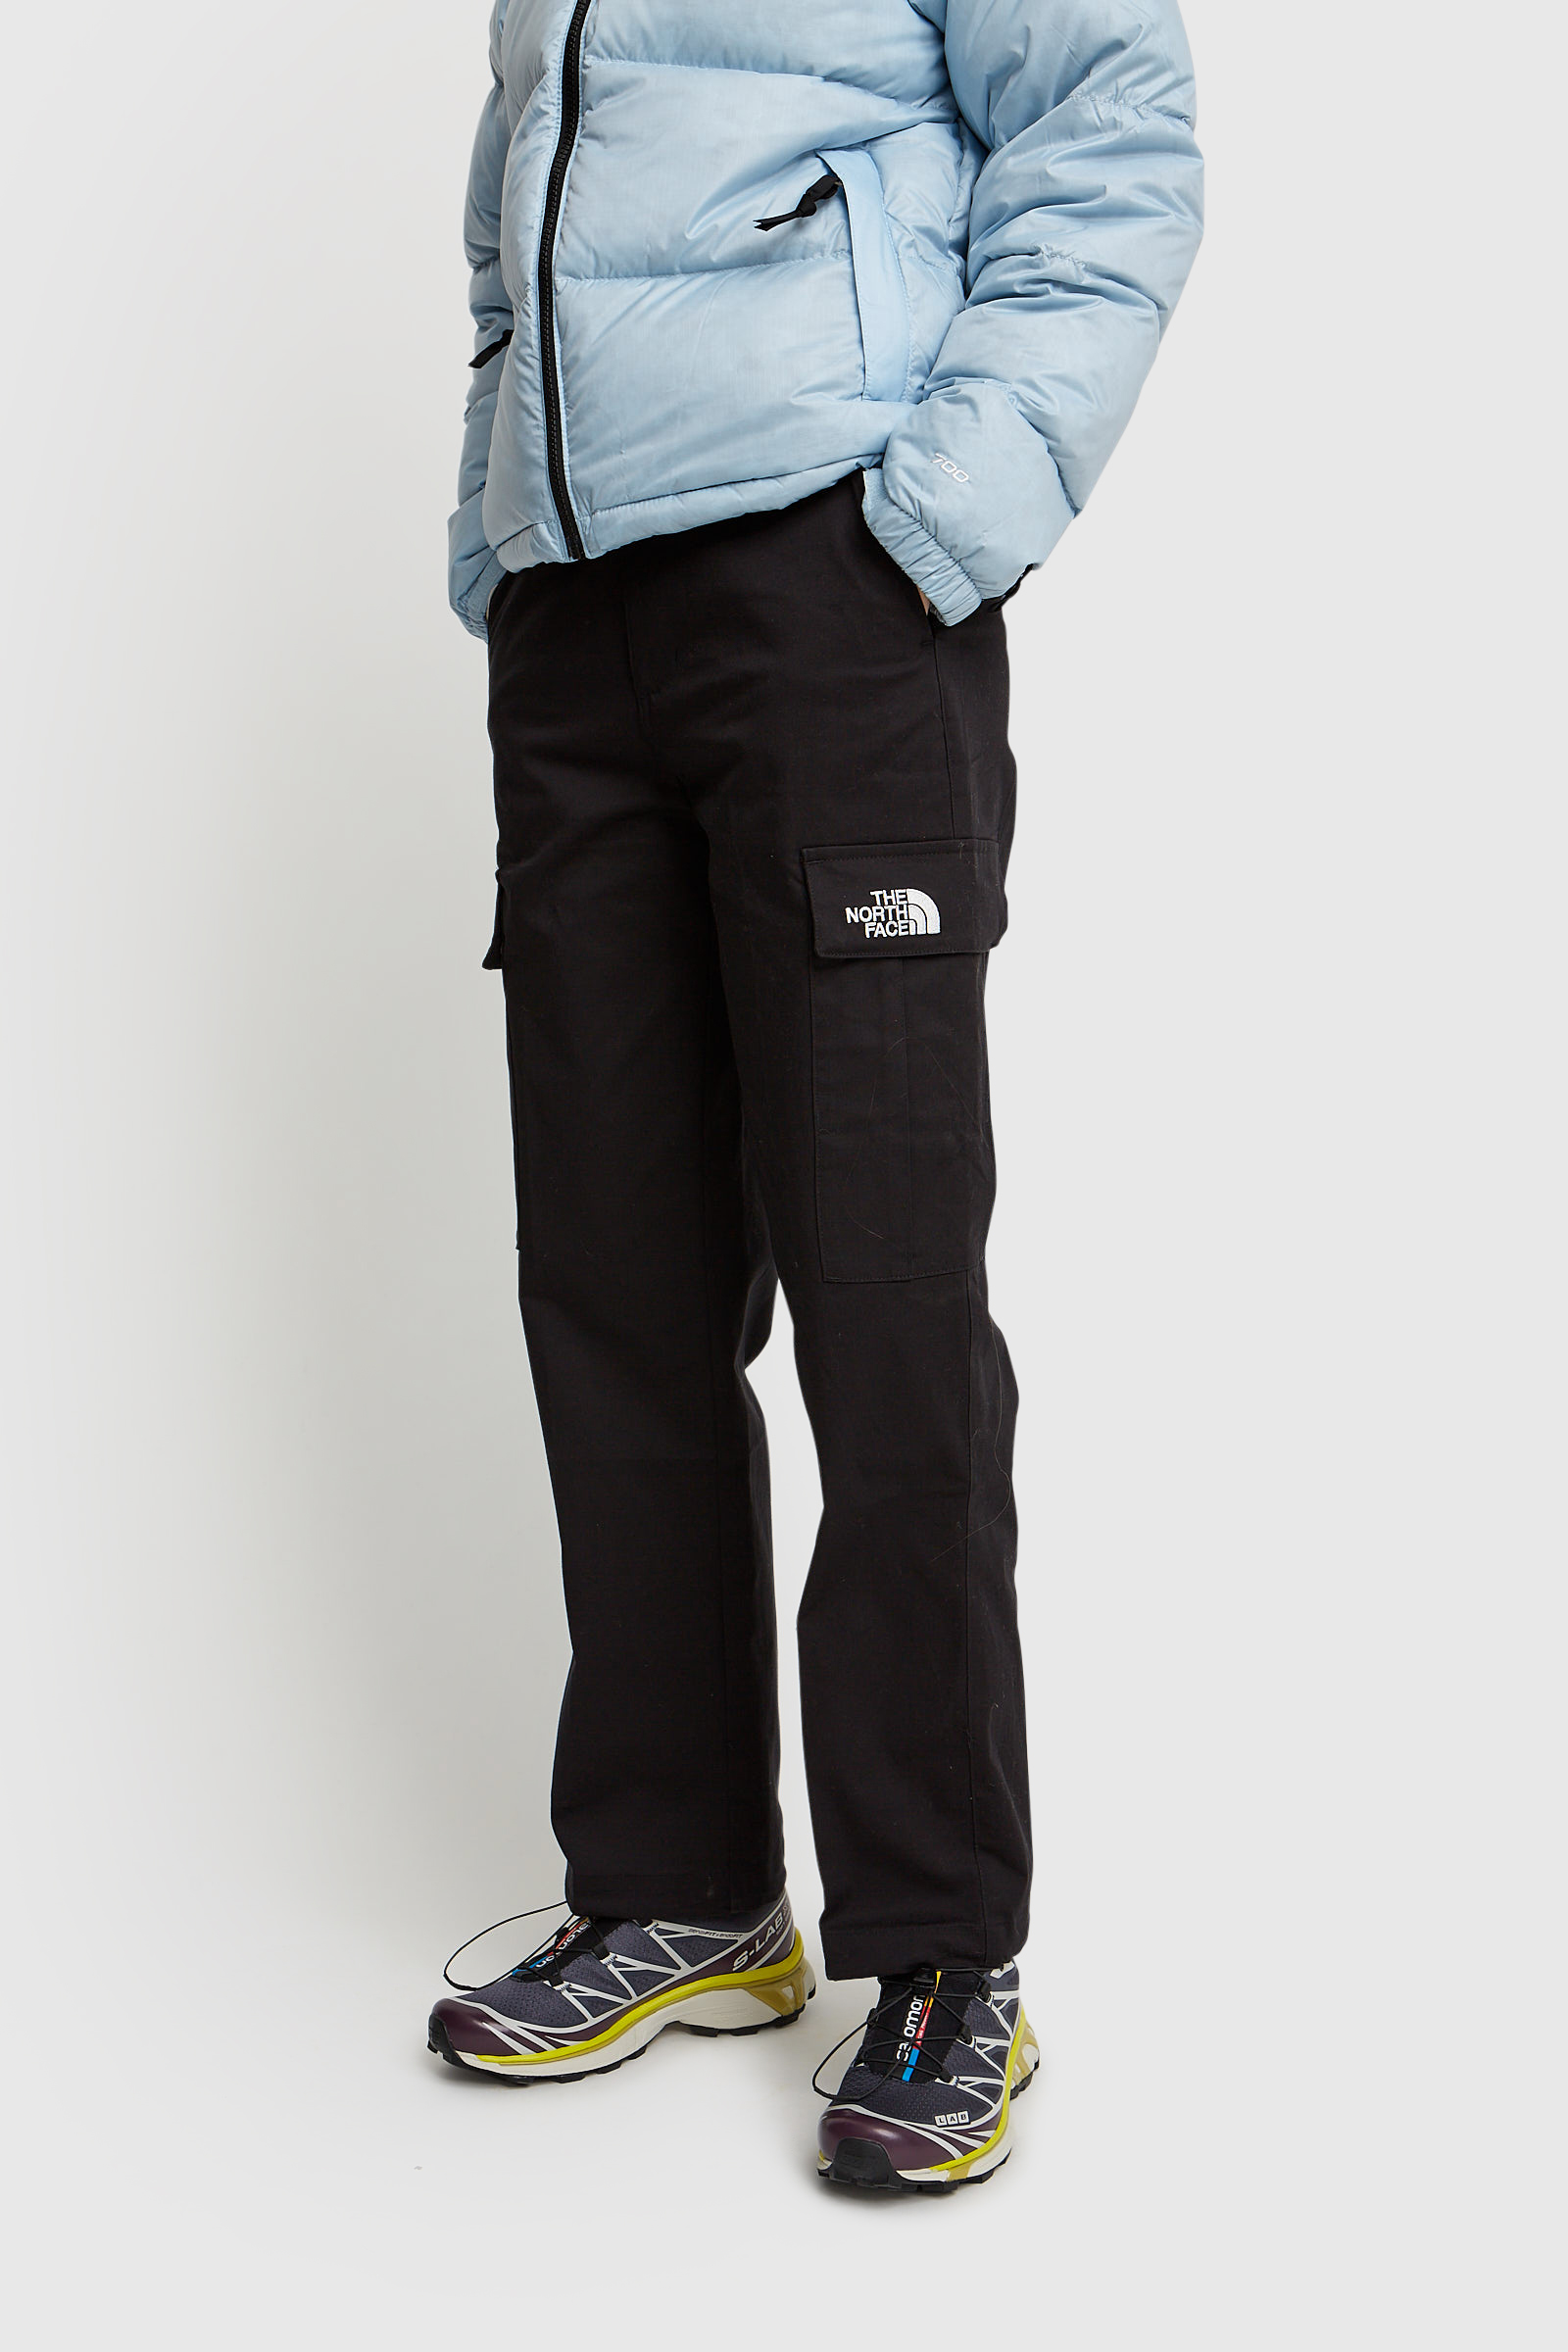 north face cargo pant